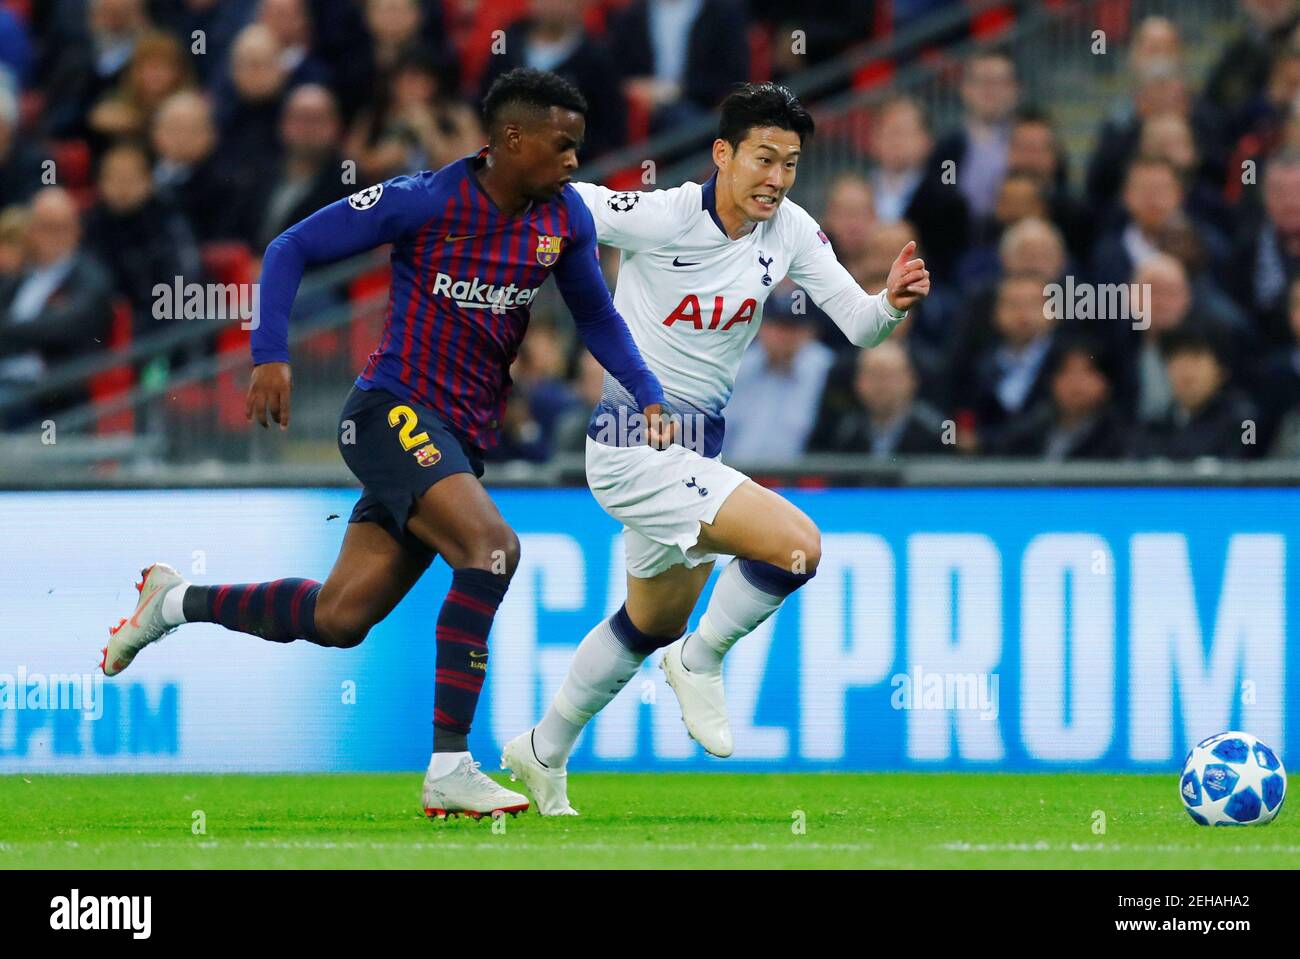 Soccer Football - Champions League - Group Stage - Group B - Tottenham Hotspur v FC Barcelona - Wembley Stadium, London, Britain - October 3, 2018  Barcelona's Nelson Semedo in action with Tottenham's Son Heung-min     REUTERS/Eddie Keogh Stock Photo